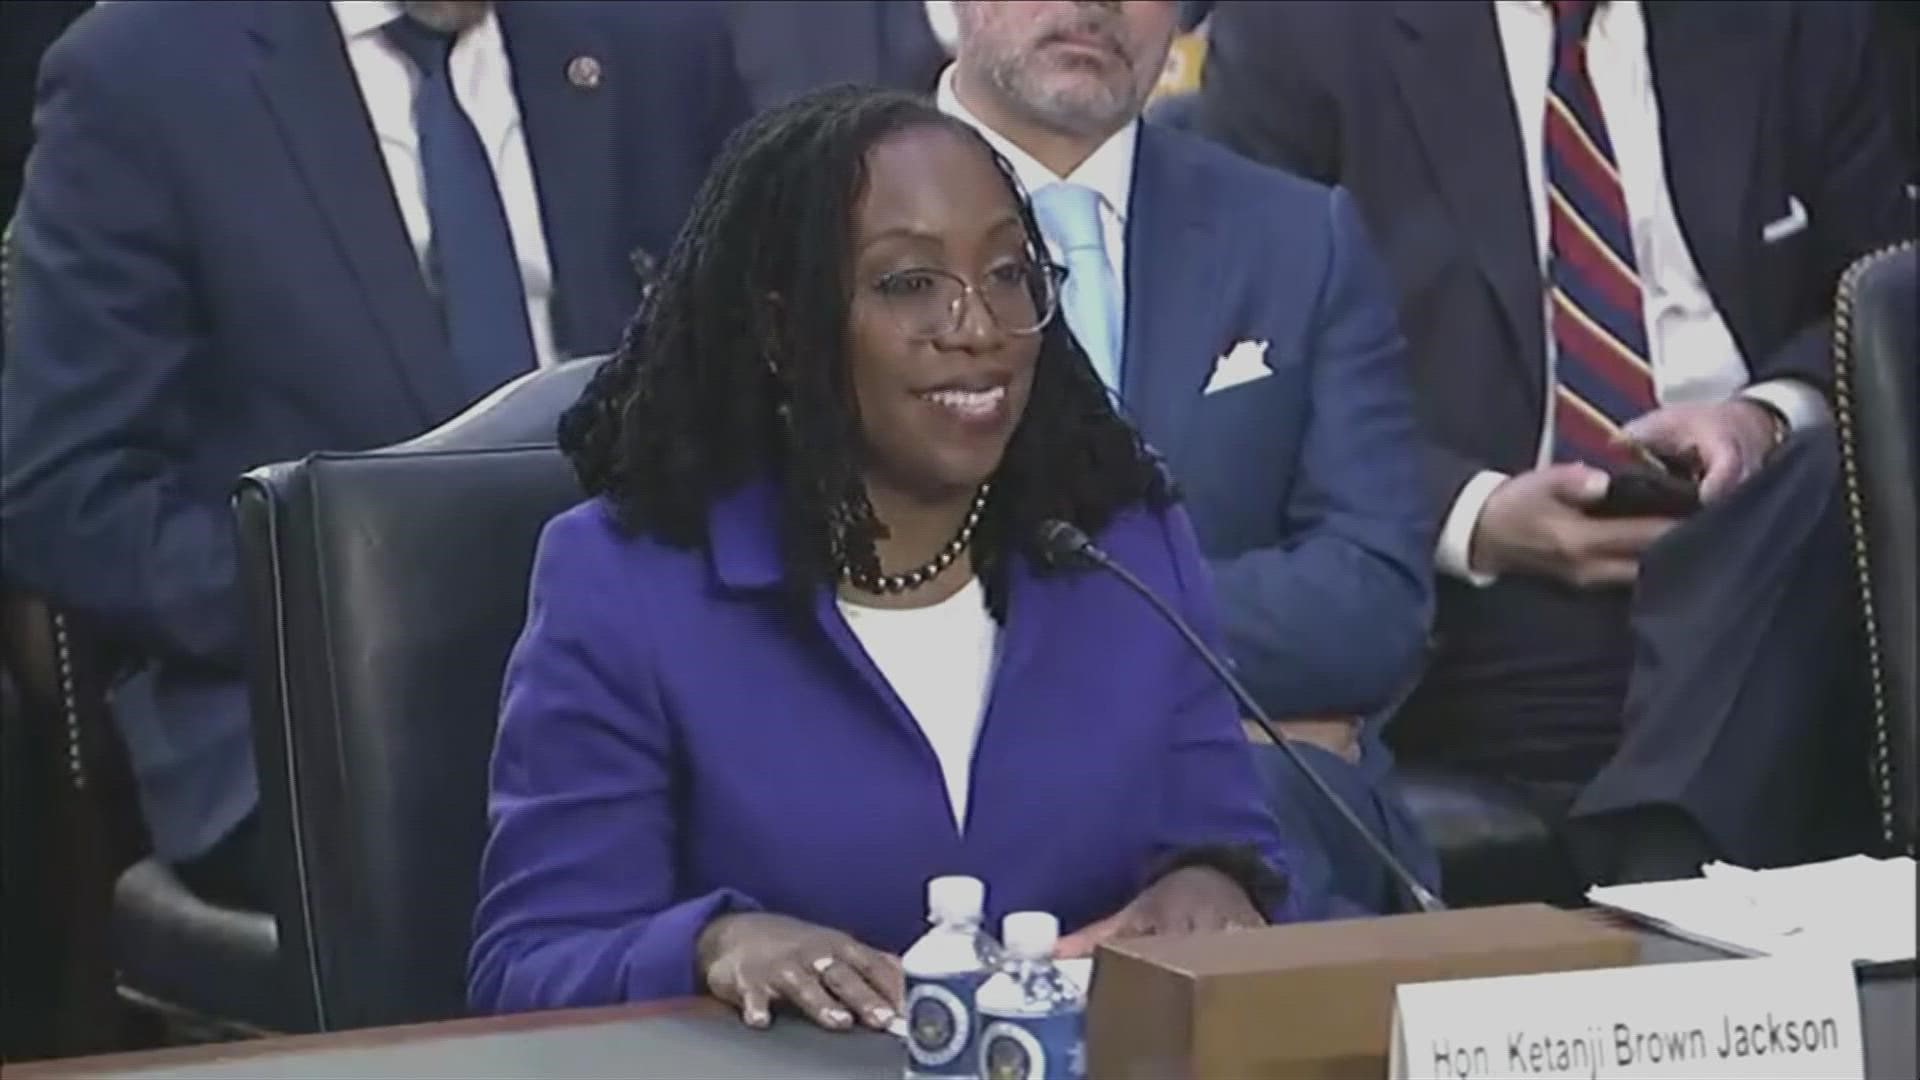 Judge Jackson, the first Black woman nominated to to the U.S. Supreme Court, said she is 'humbled and honored' by the historic nature of her nomination.